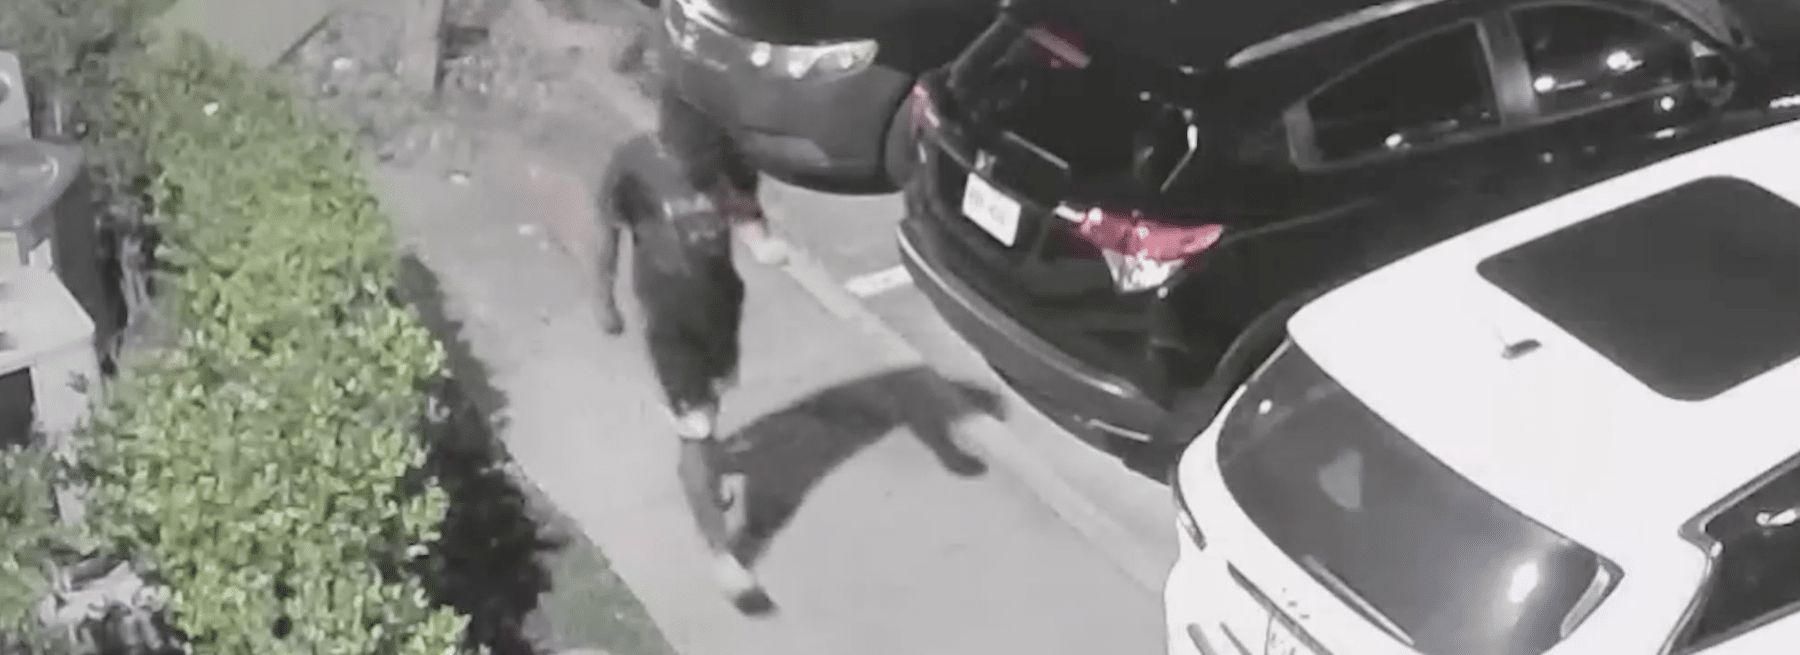 Prowler in Texas parking lot arrested